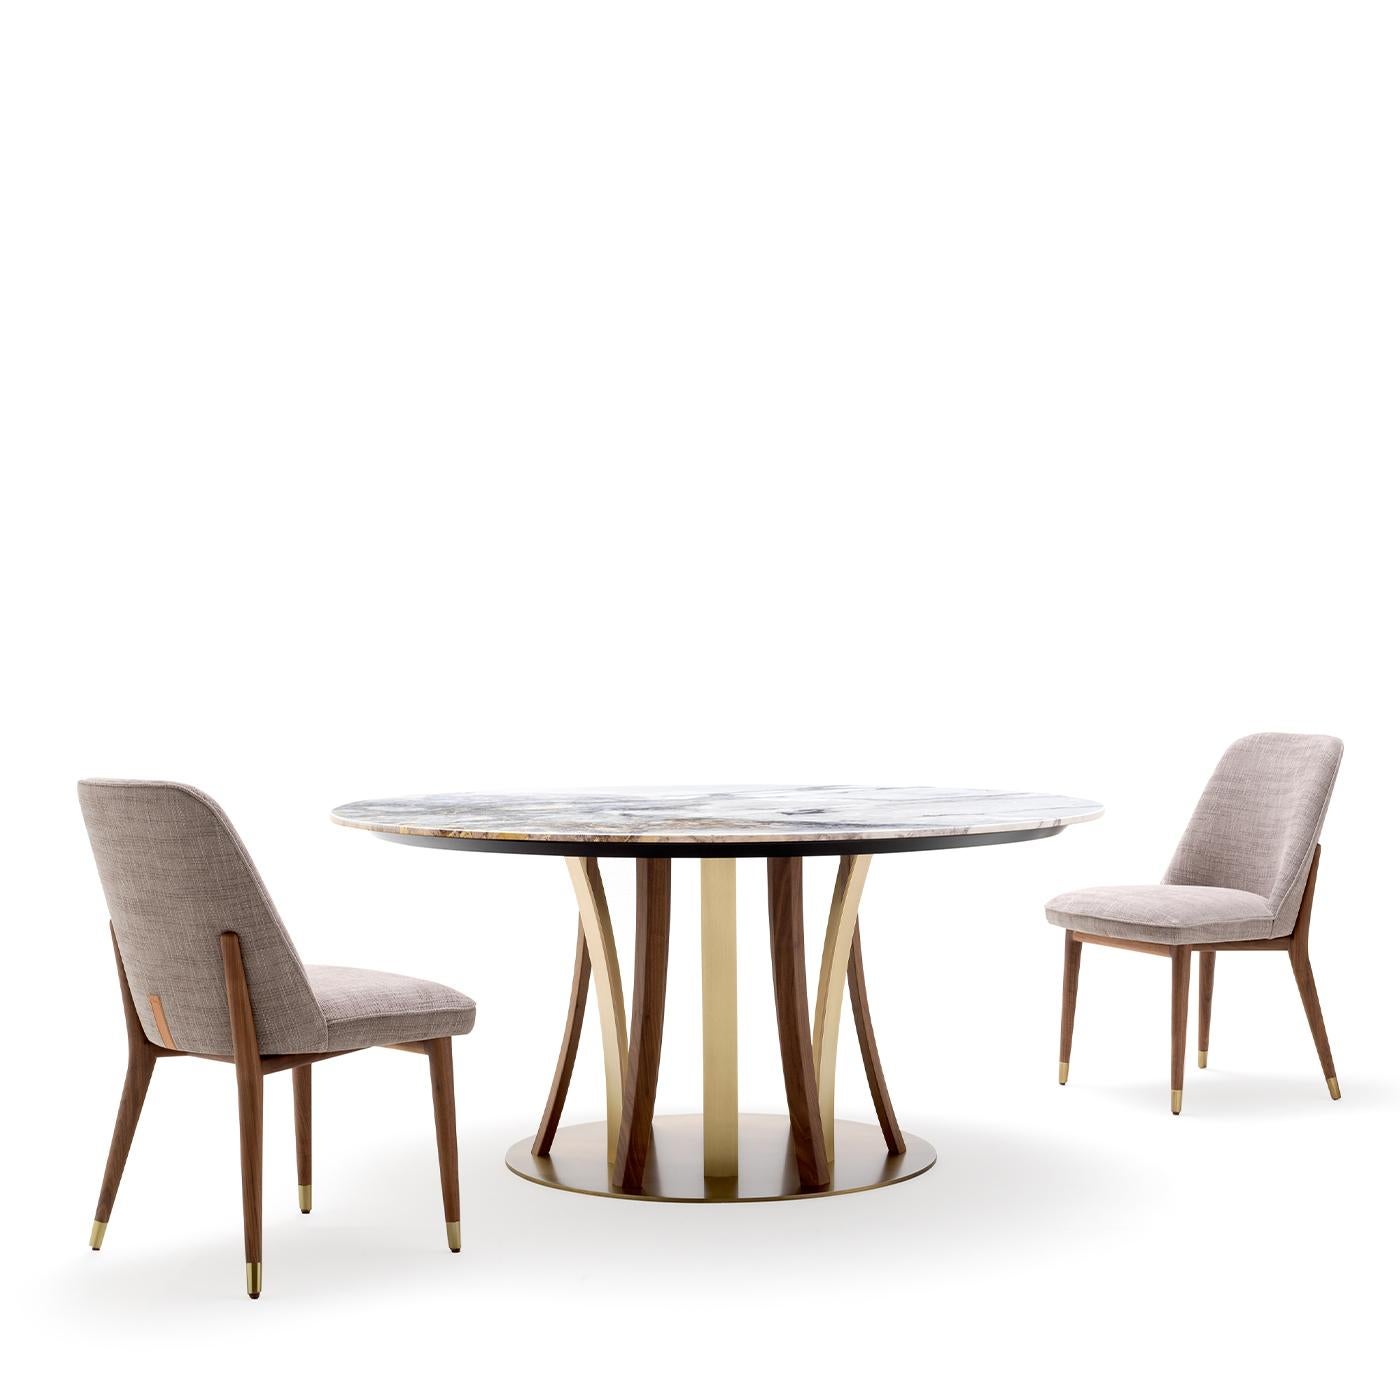 A splendid design by Castello Lagravinese Studio, this dining table will make a refined statement in a modern decor. It features a captivating base boasting a unique interplay of geometric lines composed of American walnut and satin brass-finished